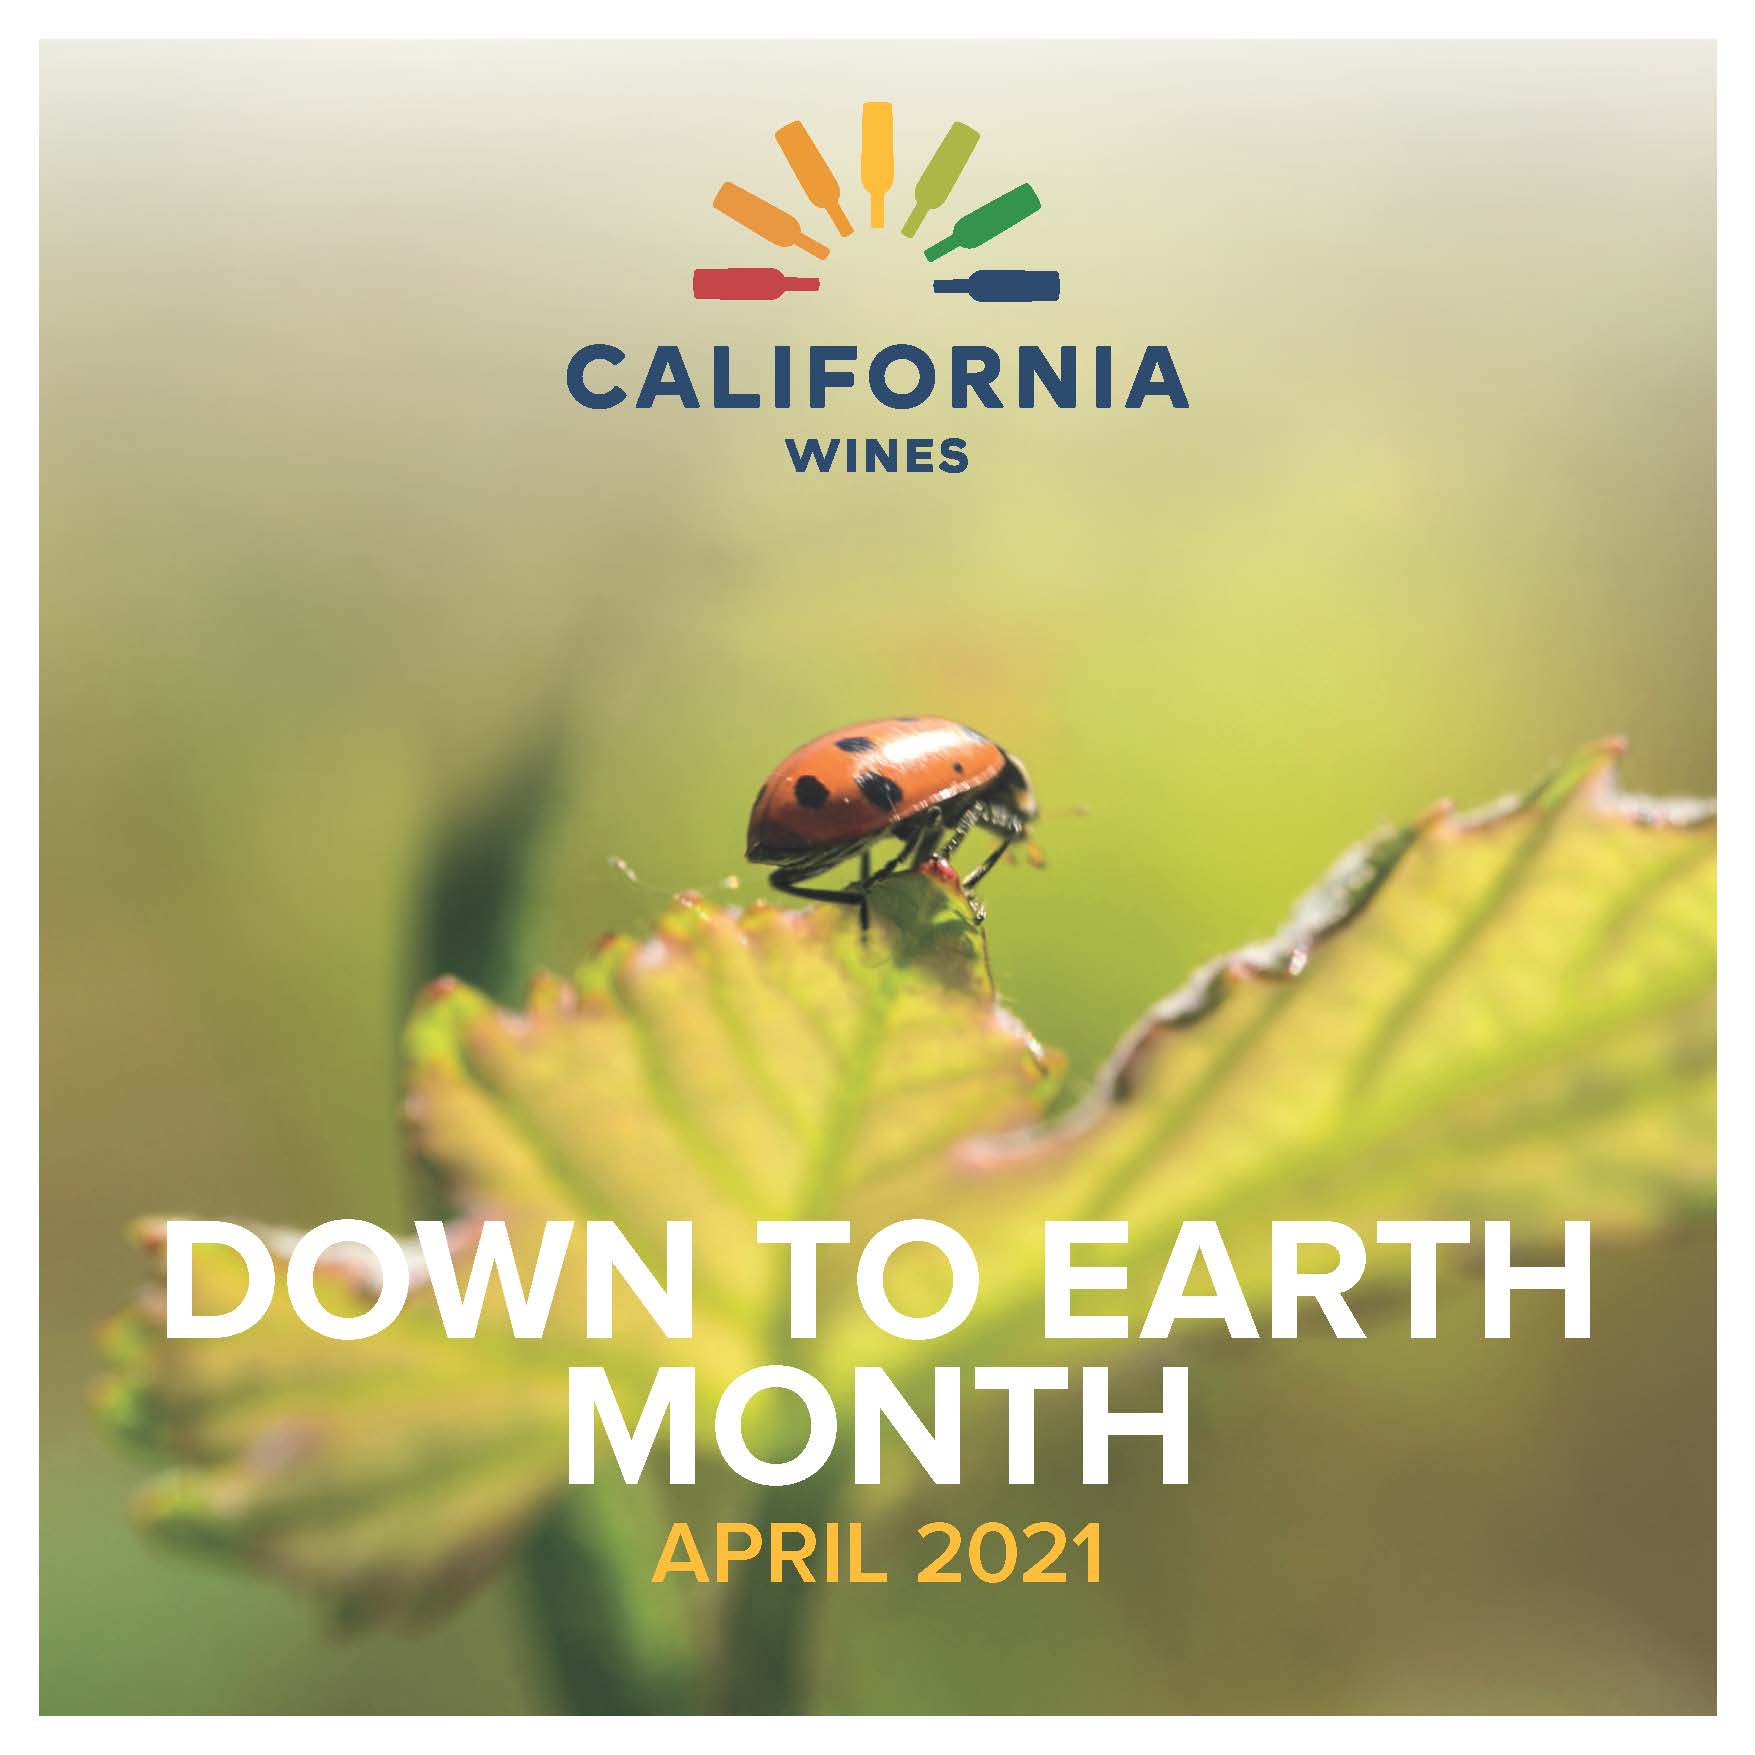 Down to Earth Month